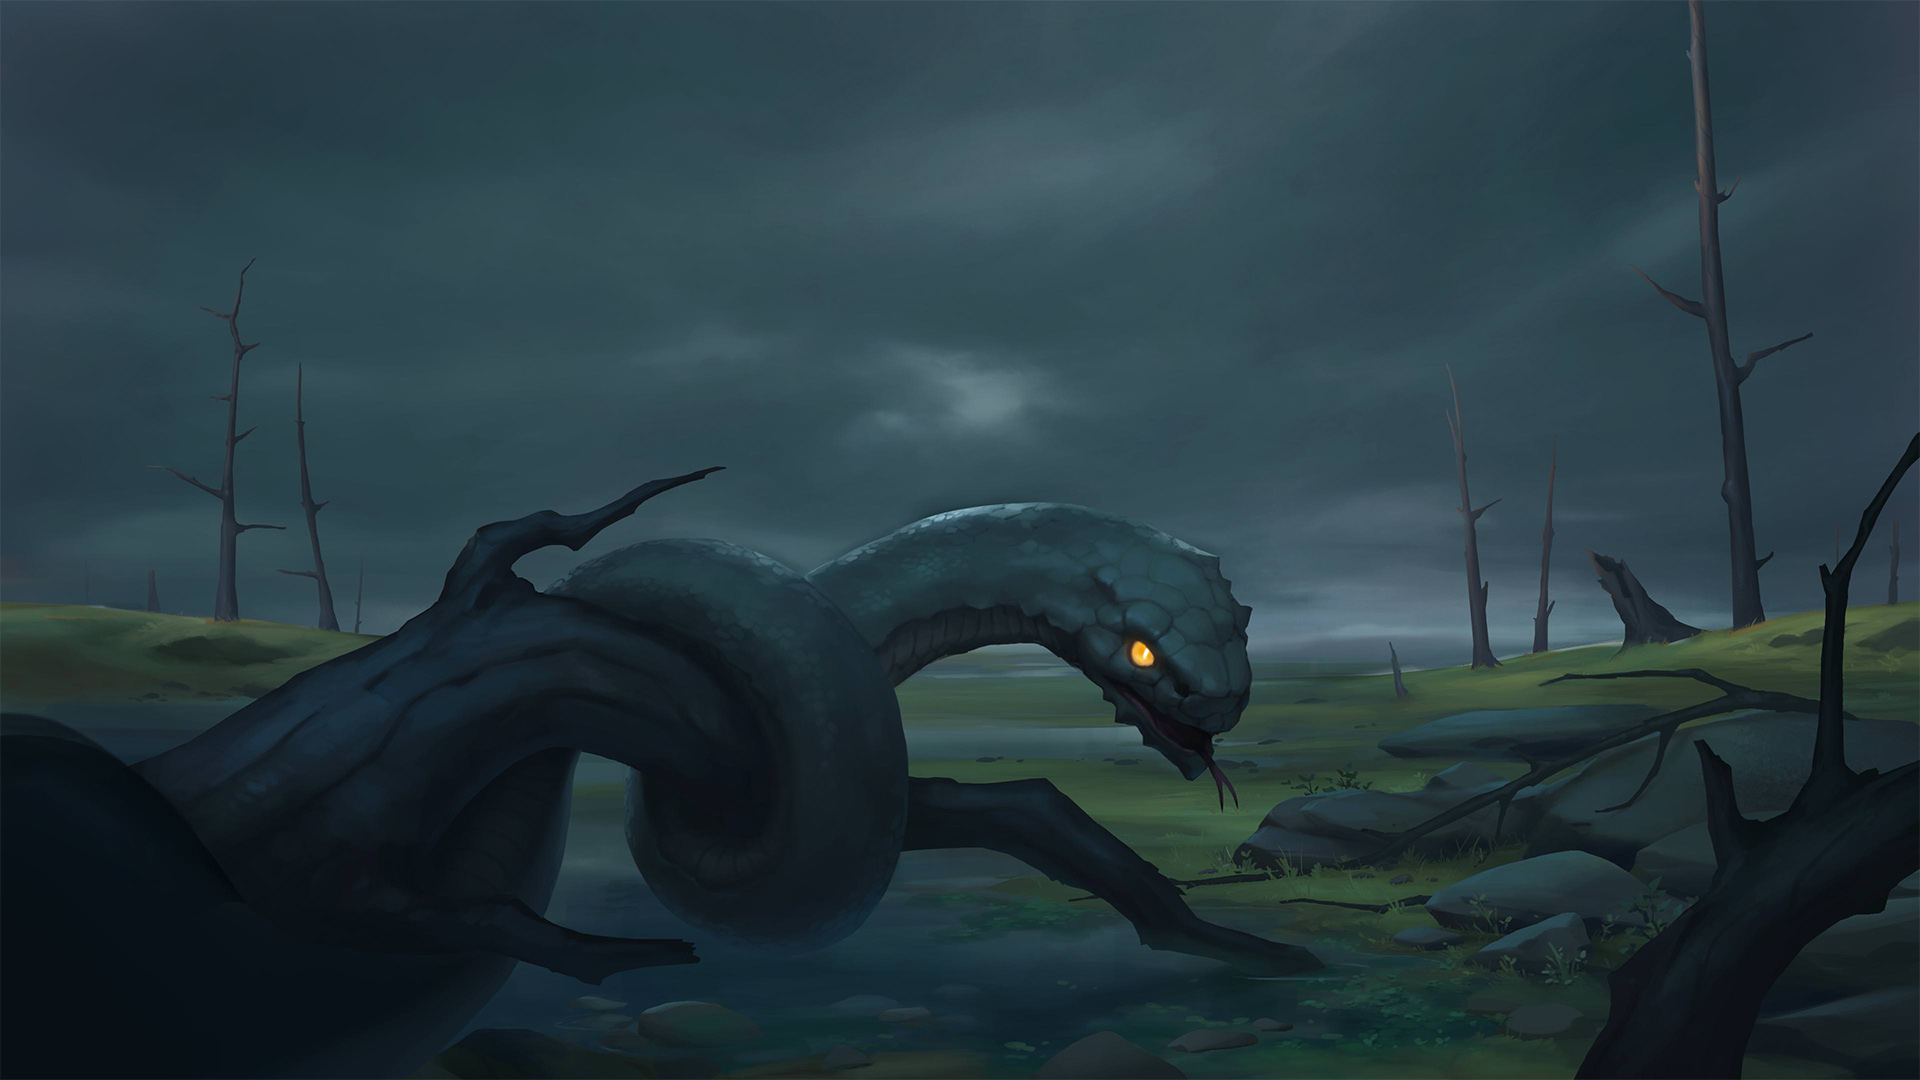 The Snake clan reaches the shores of Northgard